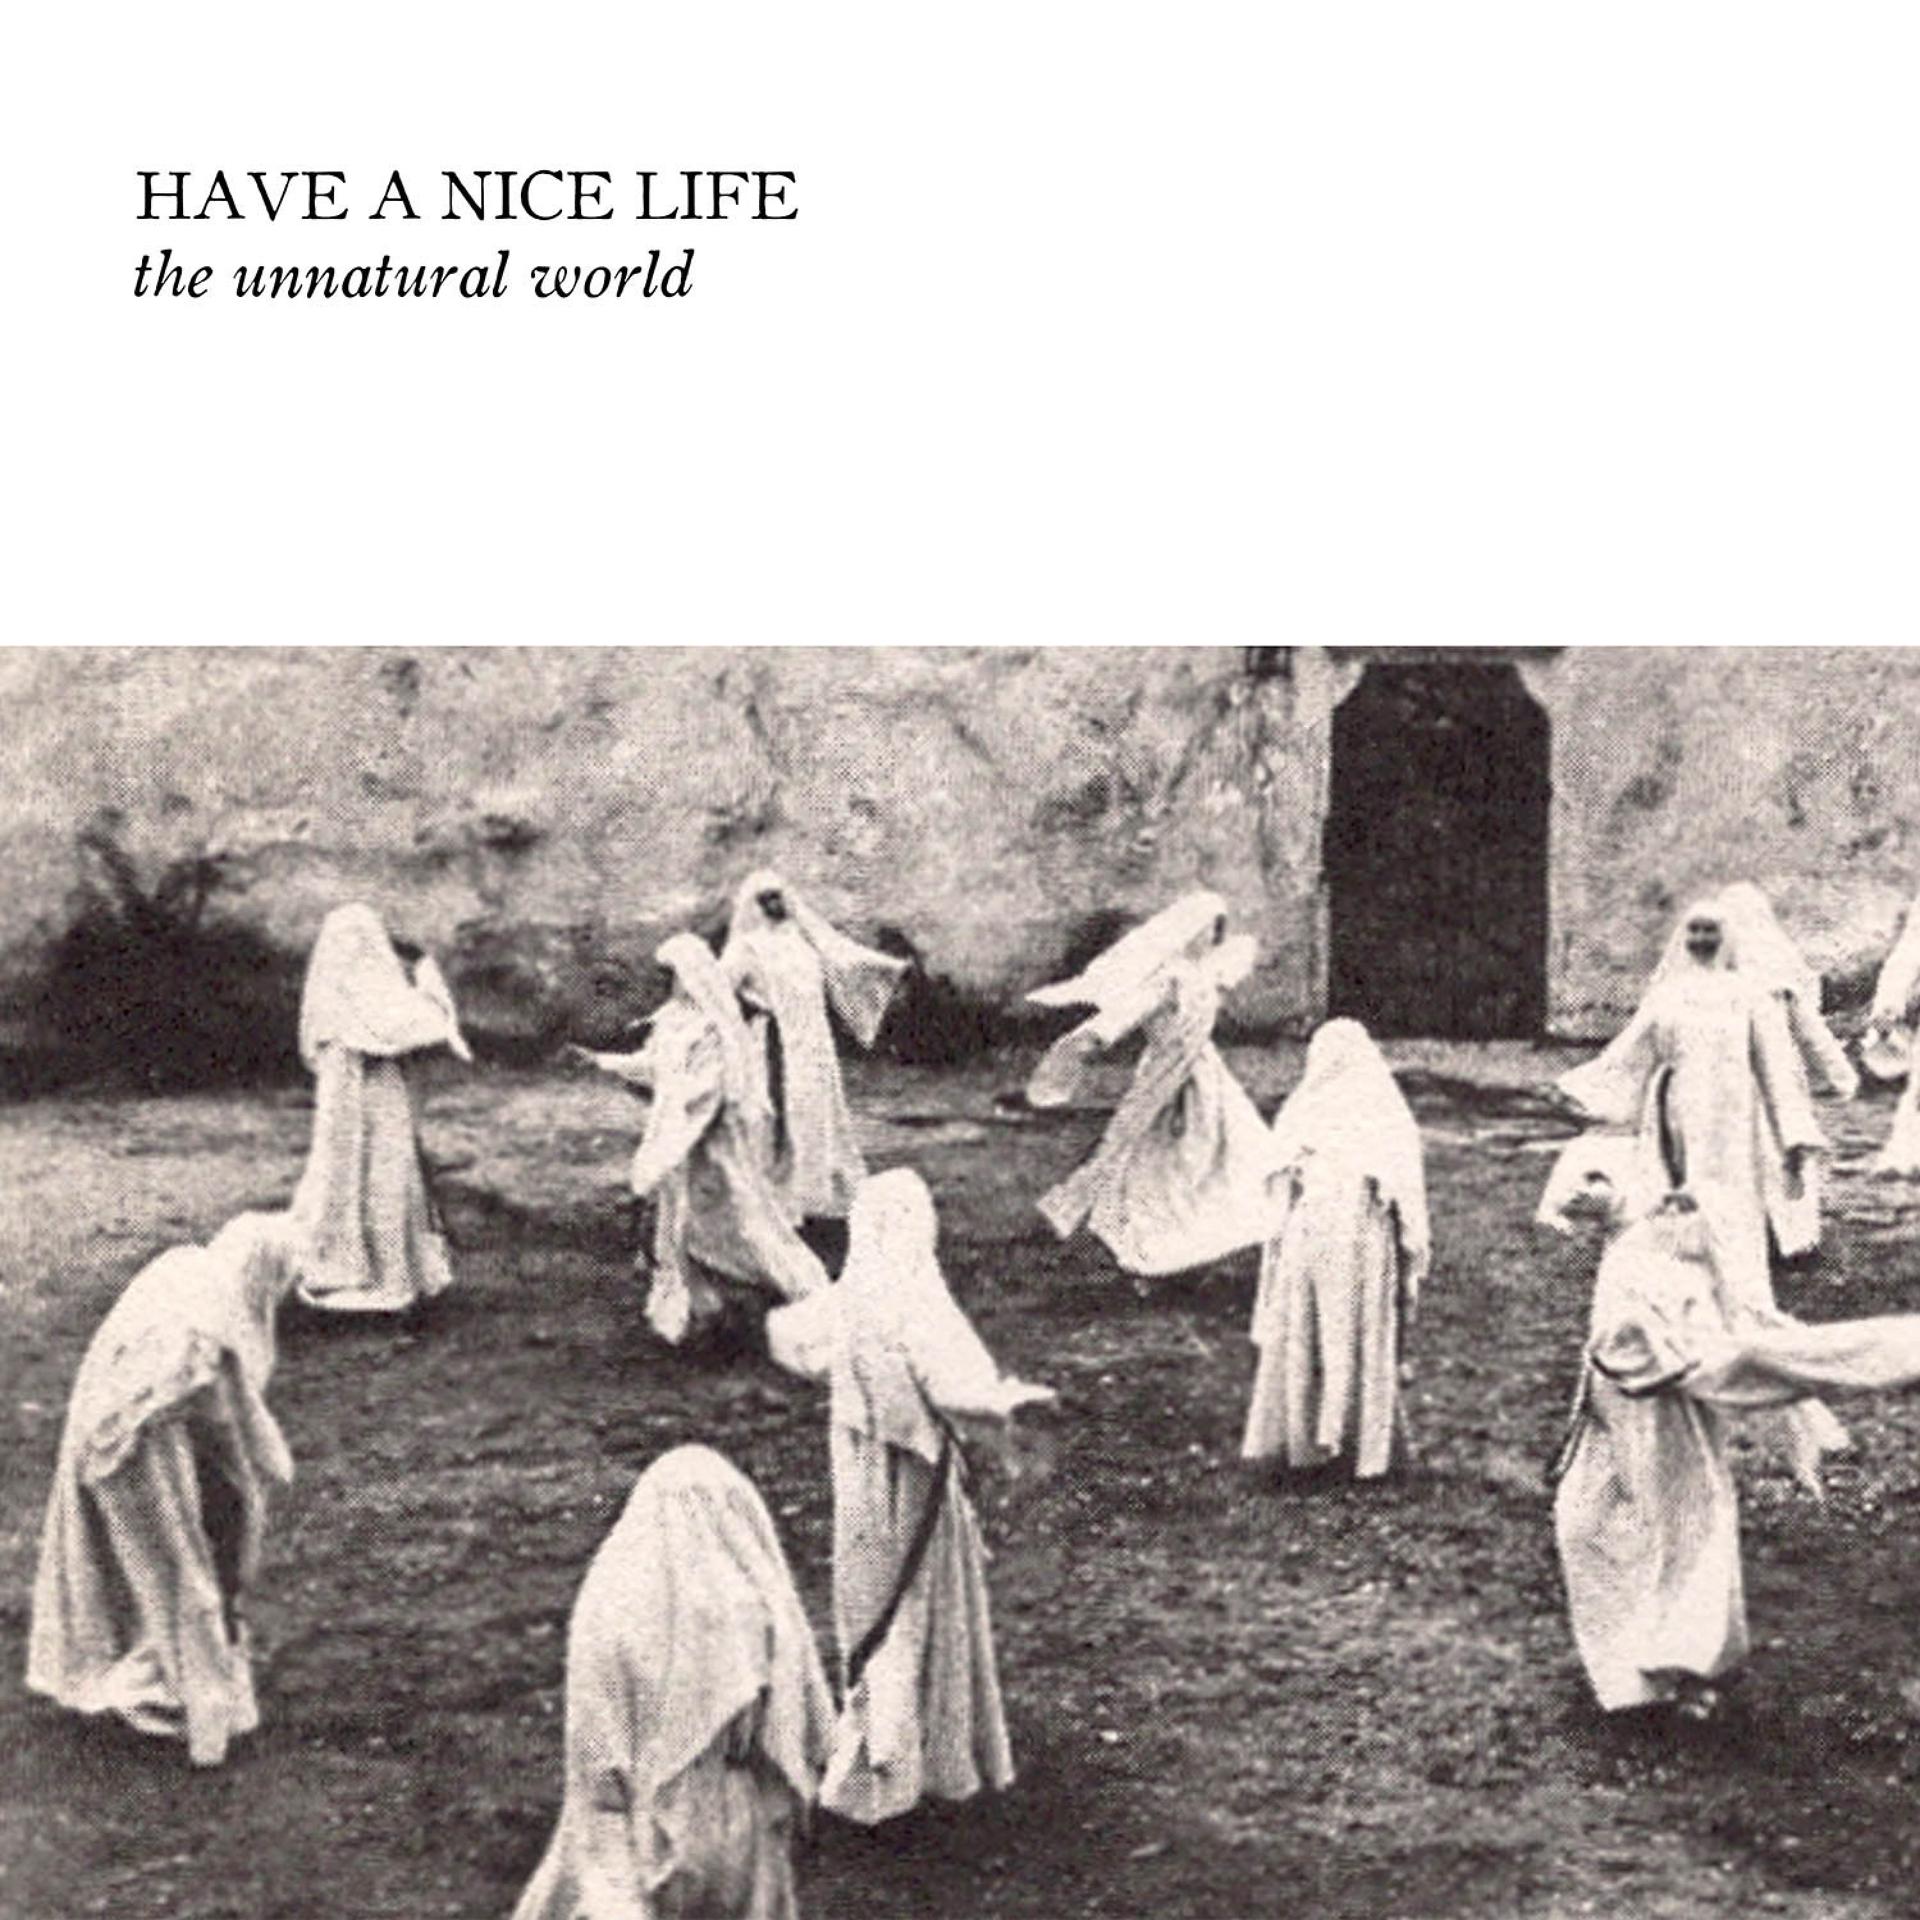 One who has the world. Have a nice Life unnatural World. Have a nice Life the unnatural World (2014) album Cover. Группа have a nice Life. Альбом have a nice Life.